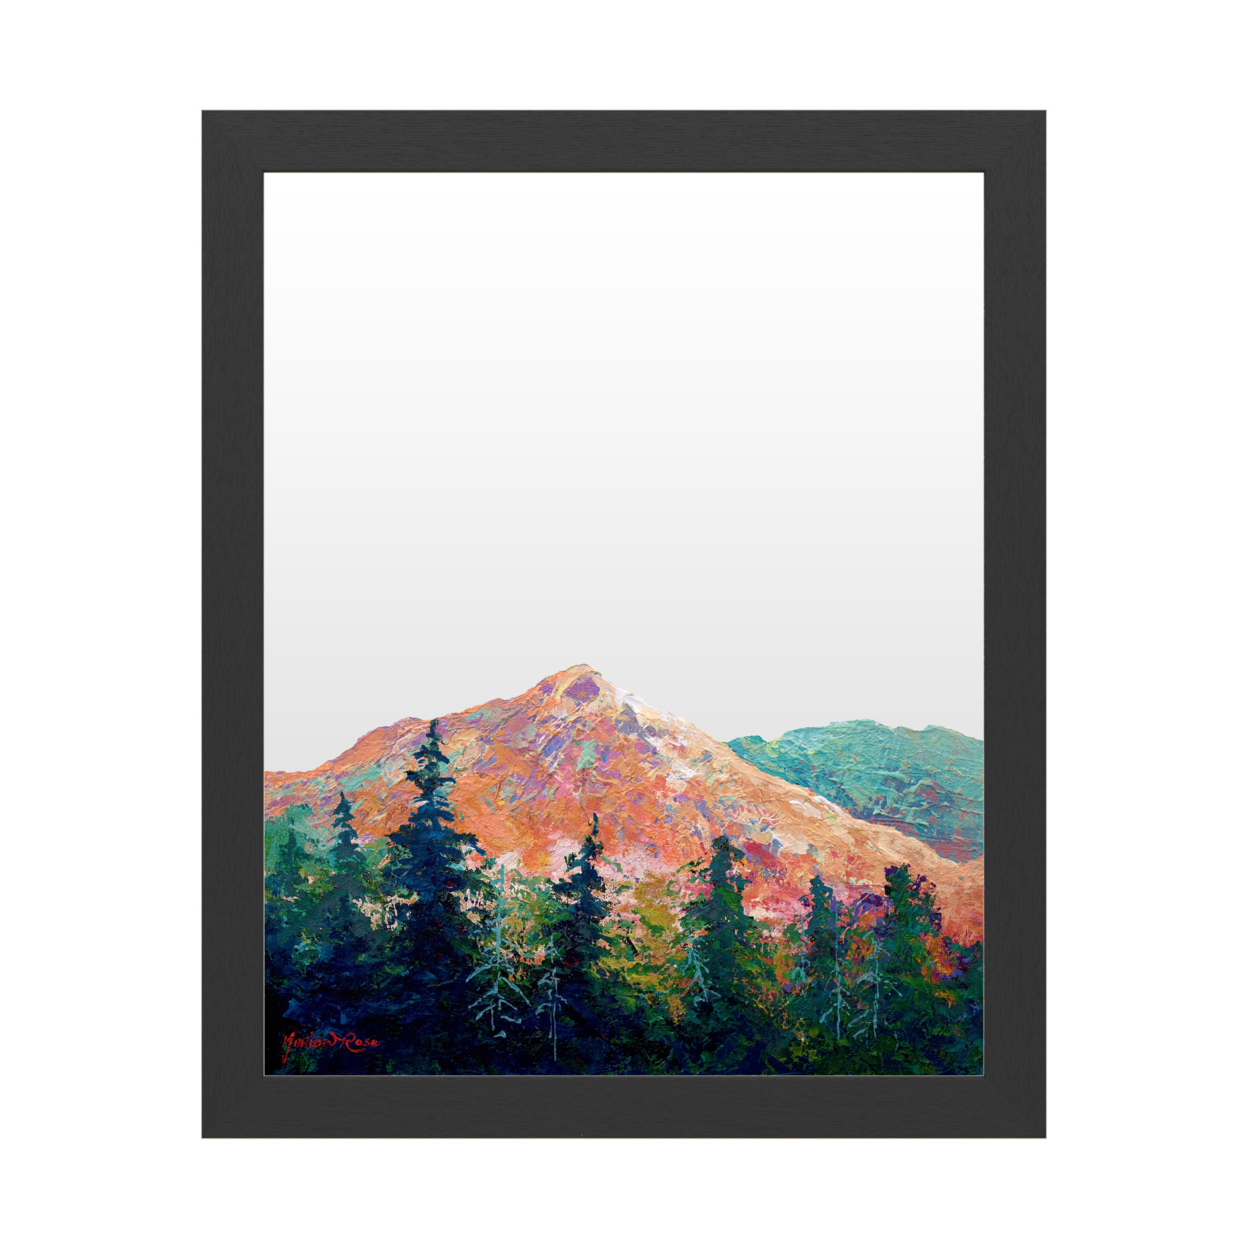 Dry Erase 16 X 20 Marker Board With Printed Artwork - Marion Rose Mtn Sentinel White Board - Ready To Hang